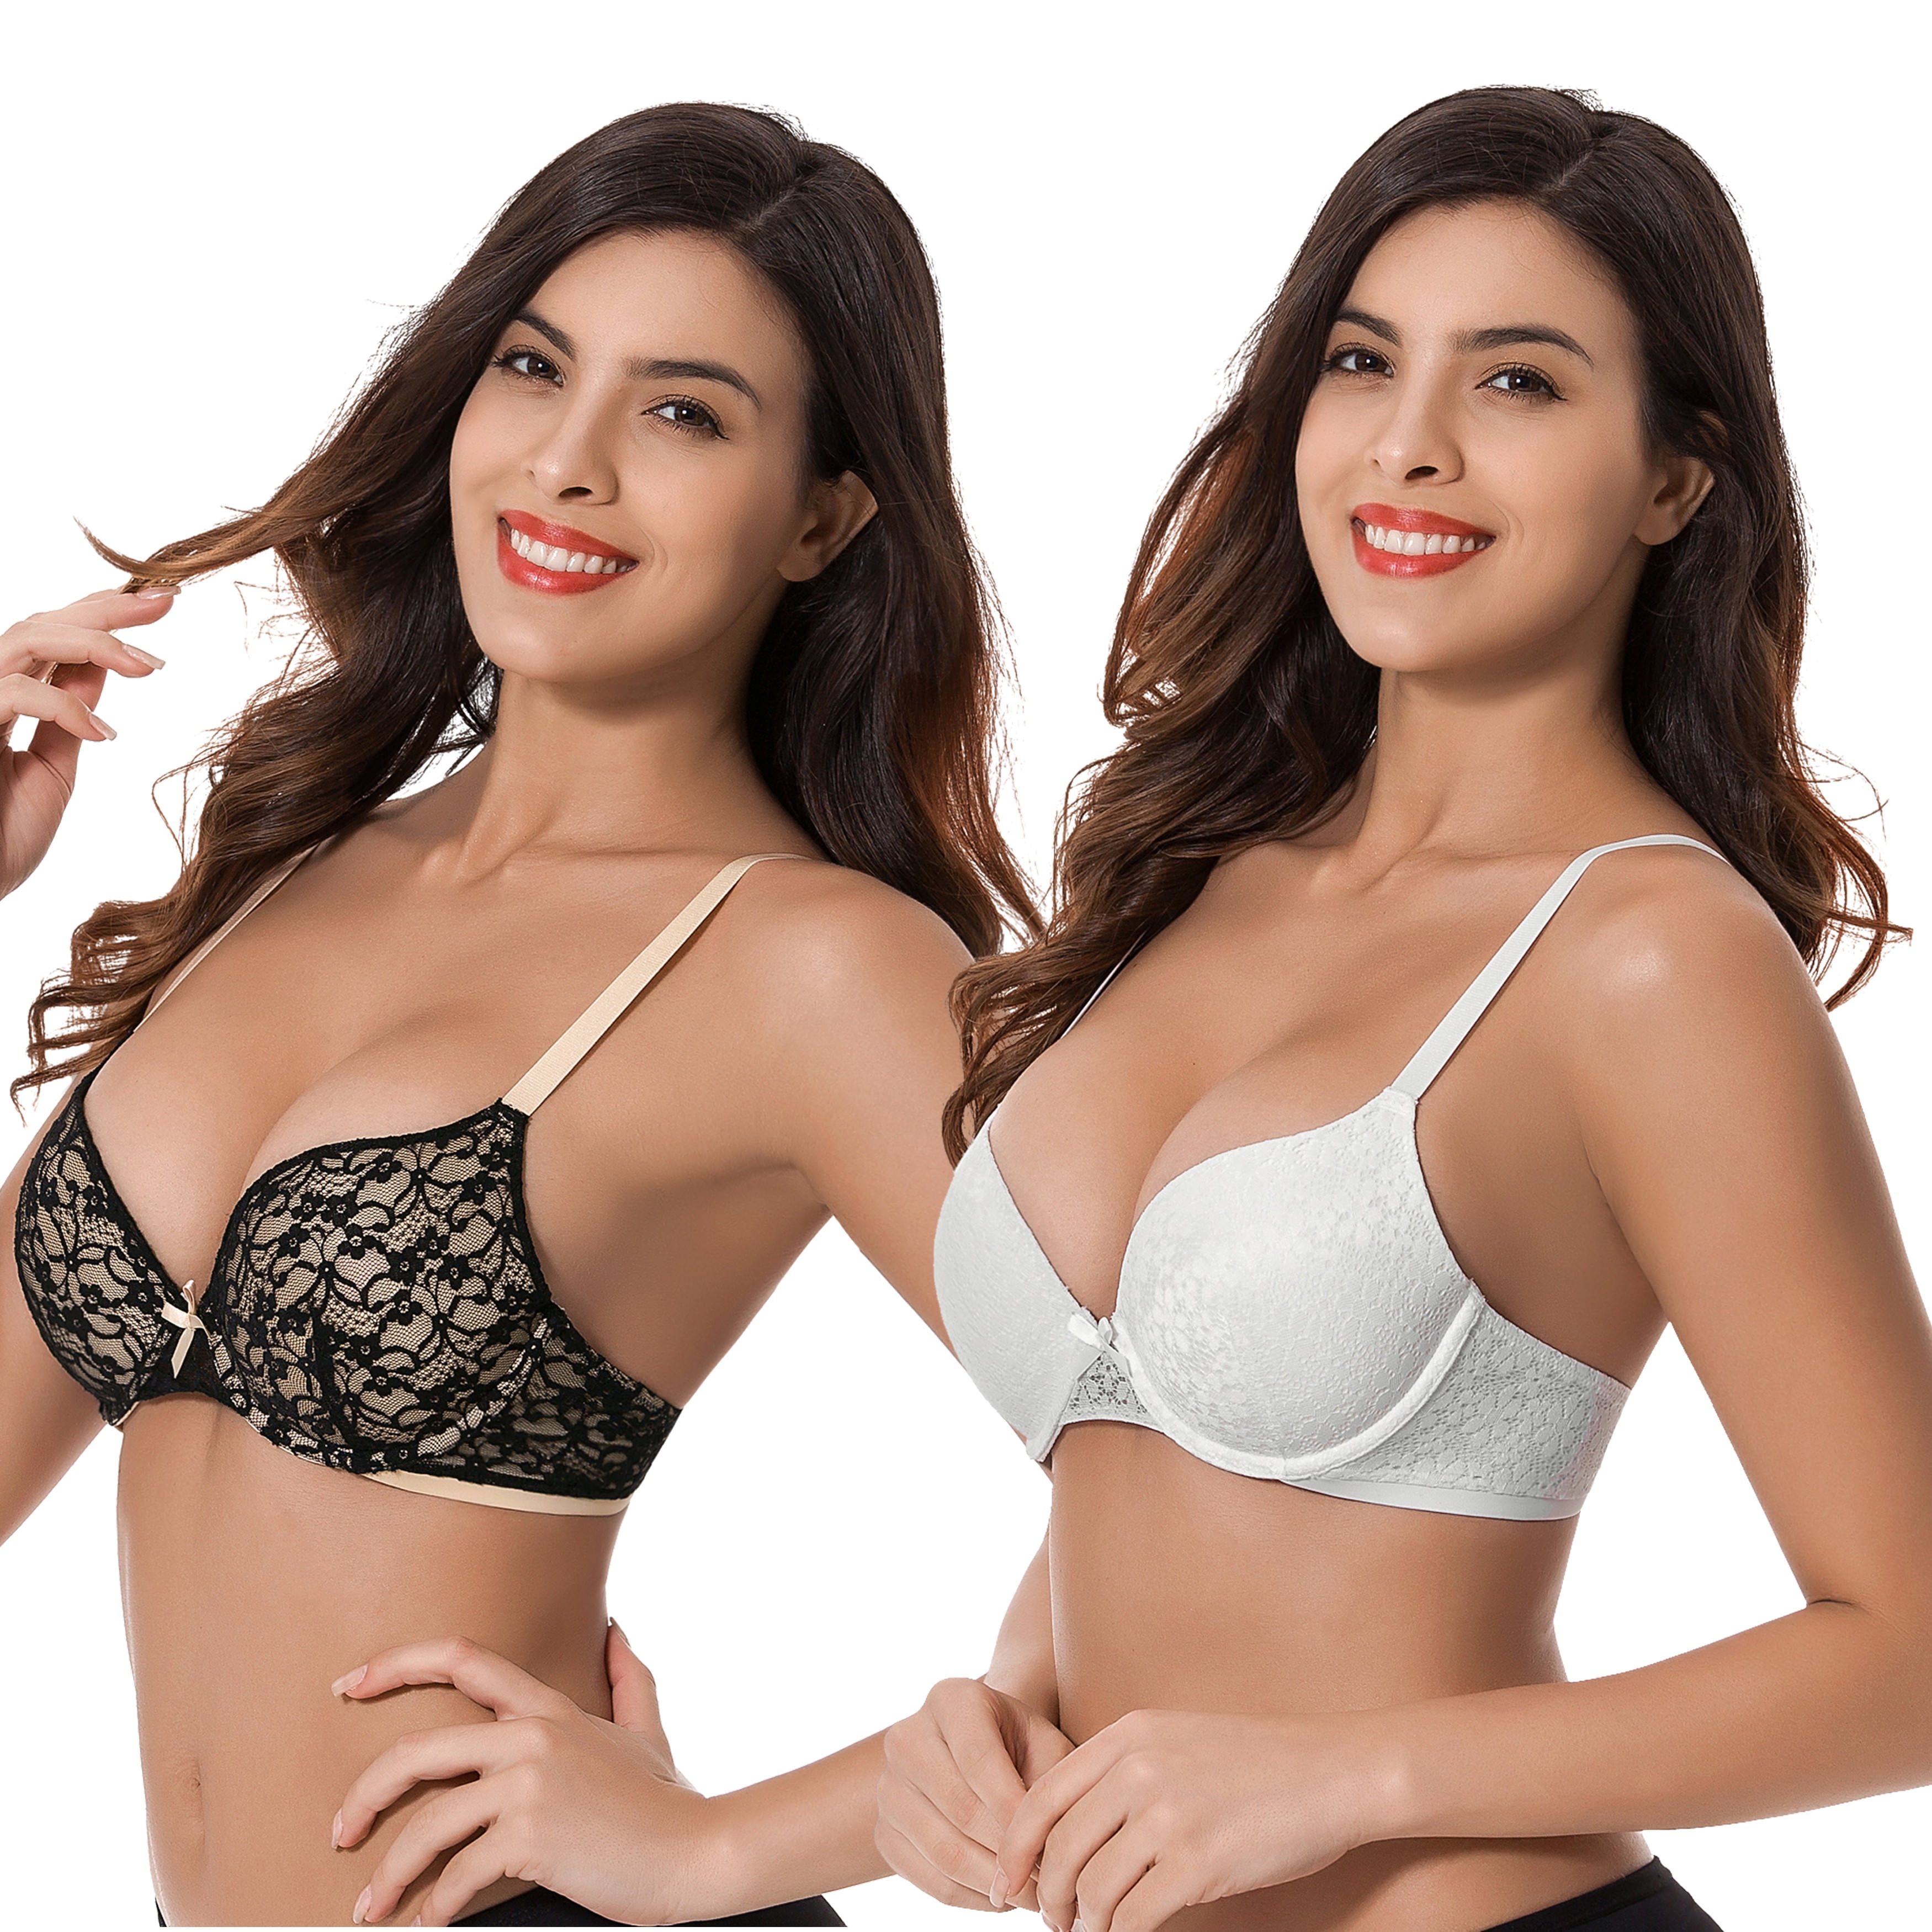 Curve Muse Plus Size Unlined Underwire Lace Bra with Padded Shoulder  Straps-2PK-Pink Print,Nude-40B/90B price in UAE,  UAE